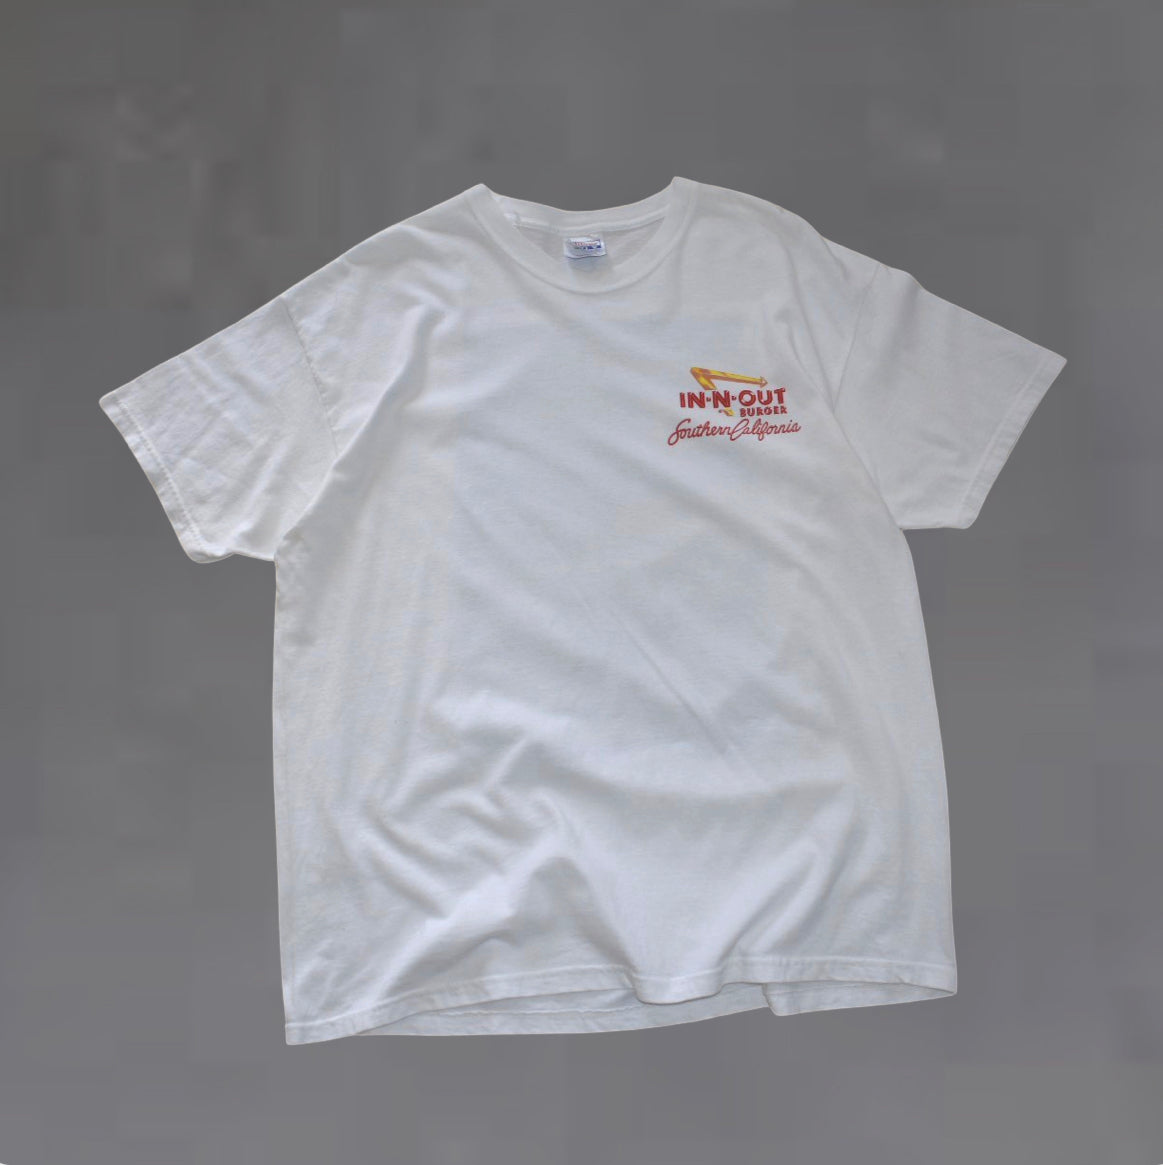 In-N-Out Burger Southern California Tee (XL)